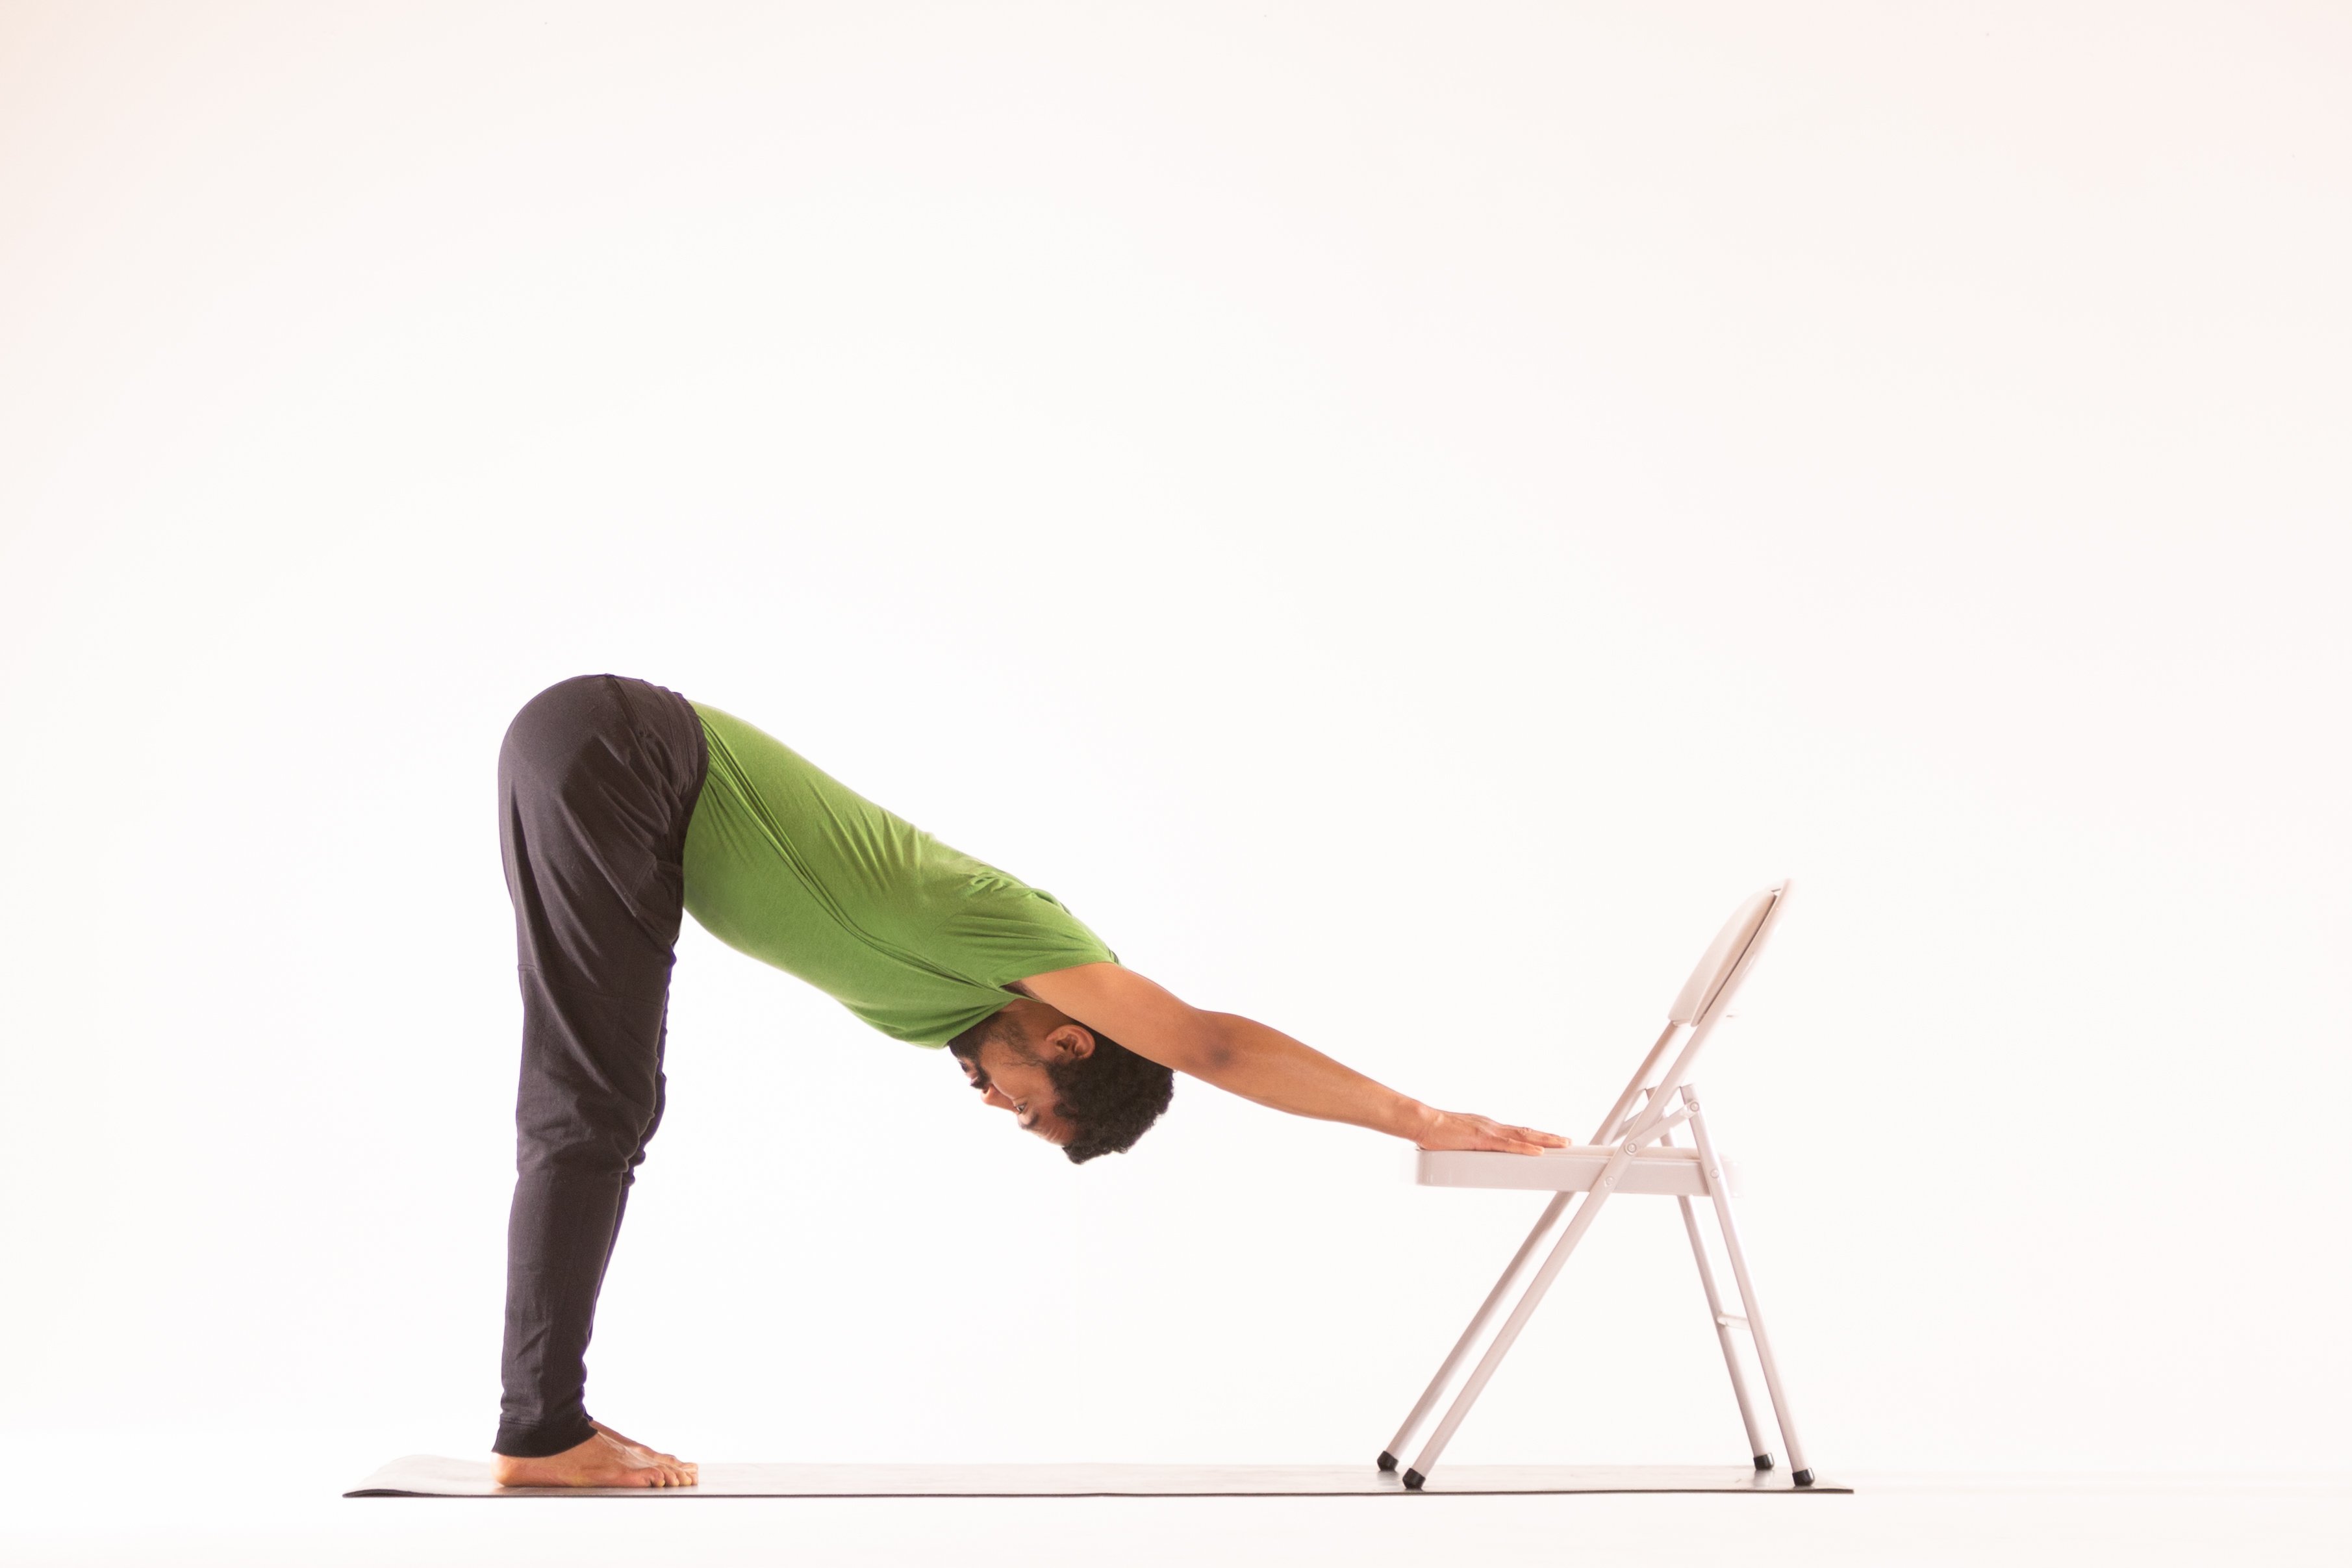 Chair Yoga Standing Pose for Core Strength and Balance Hello, fellow Dharma  Bums! This week, I'm sharing a chair yoga standing pose to help you improve  your core strength and balance. Holding